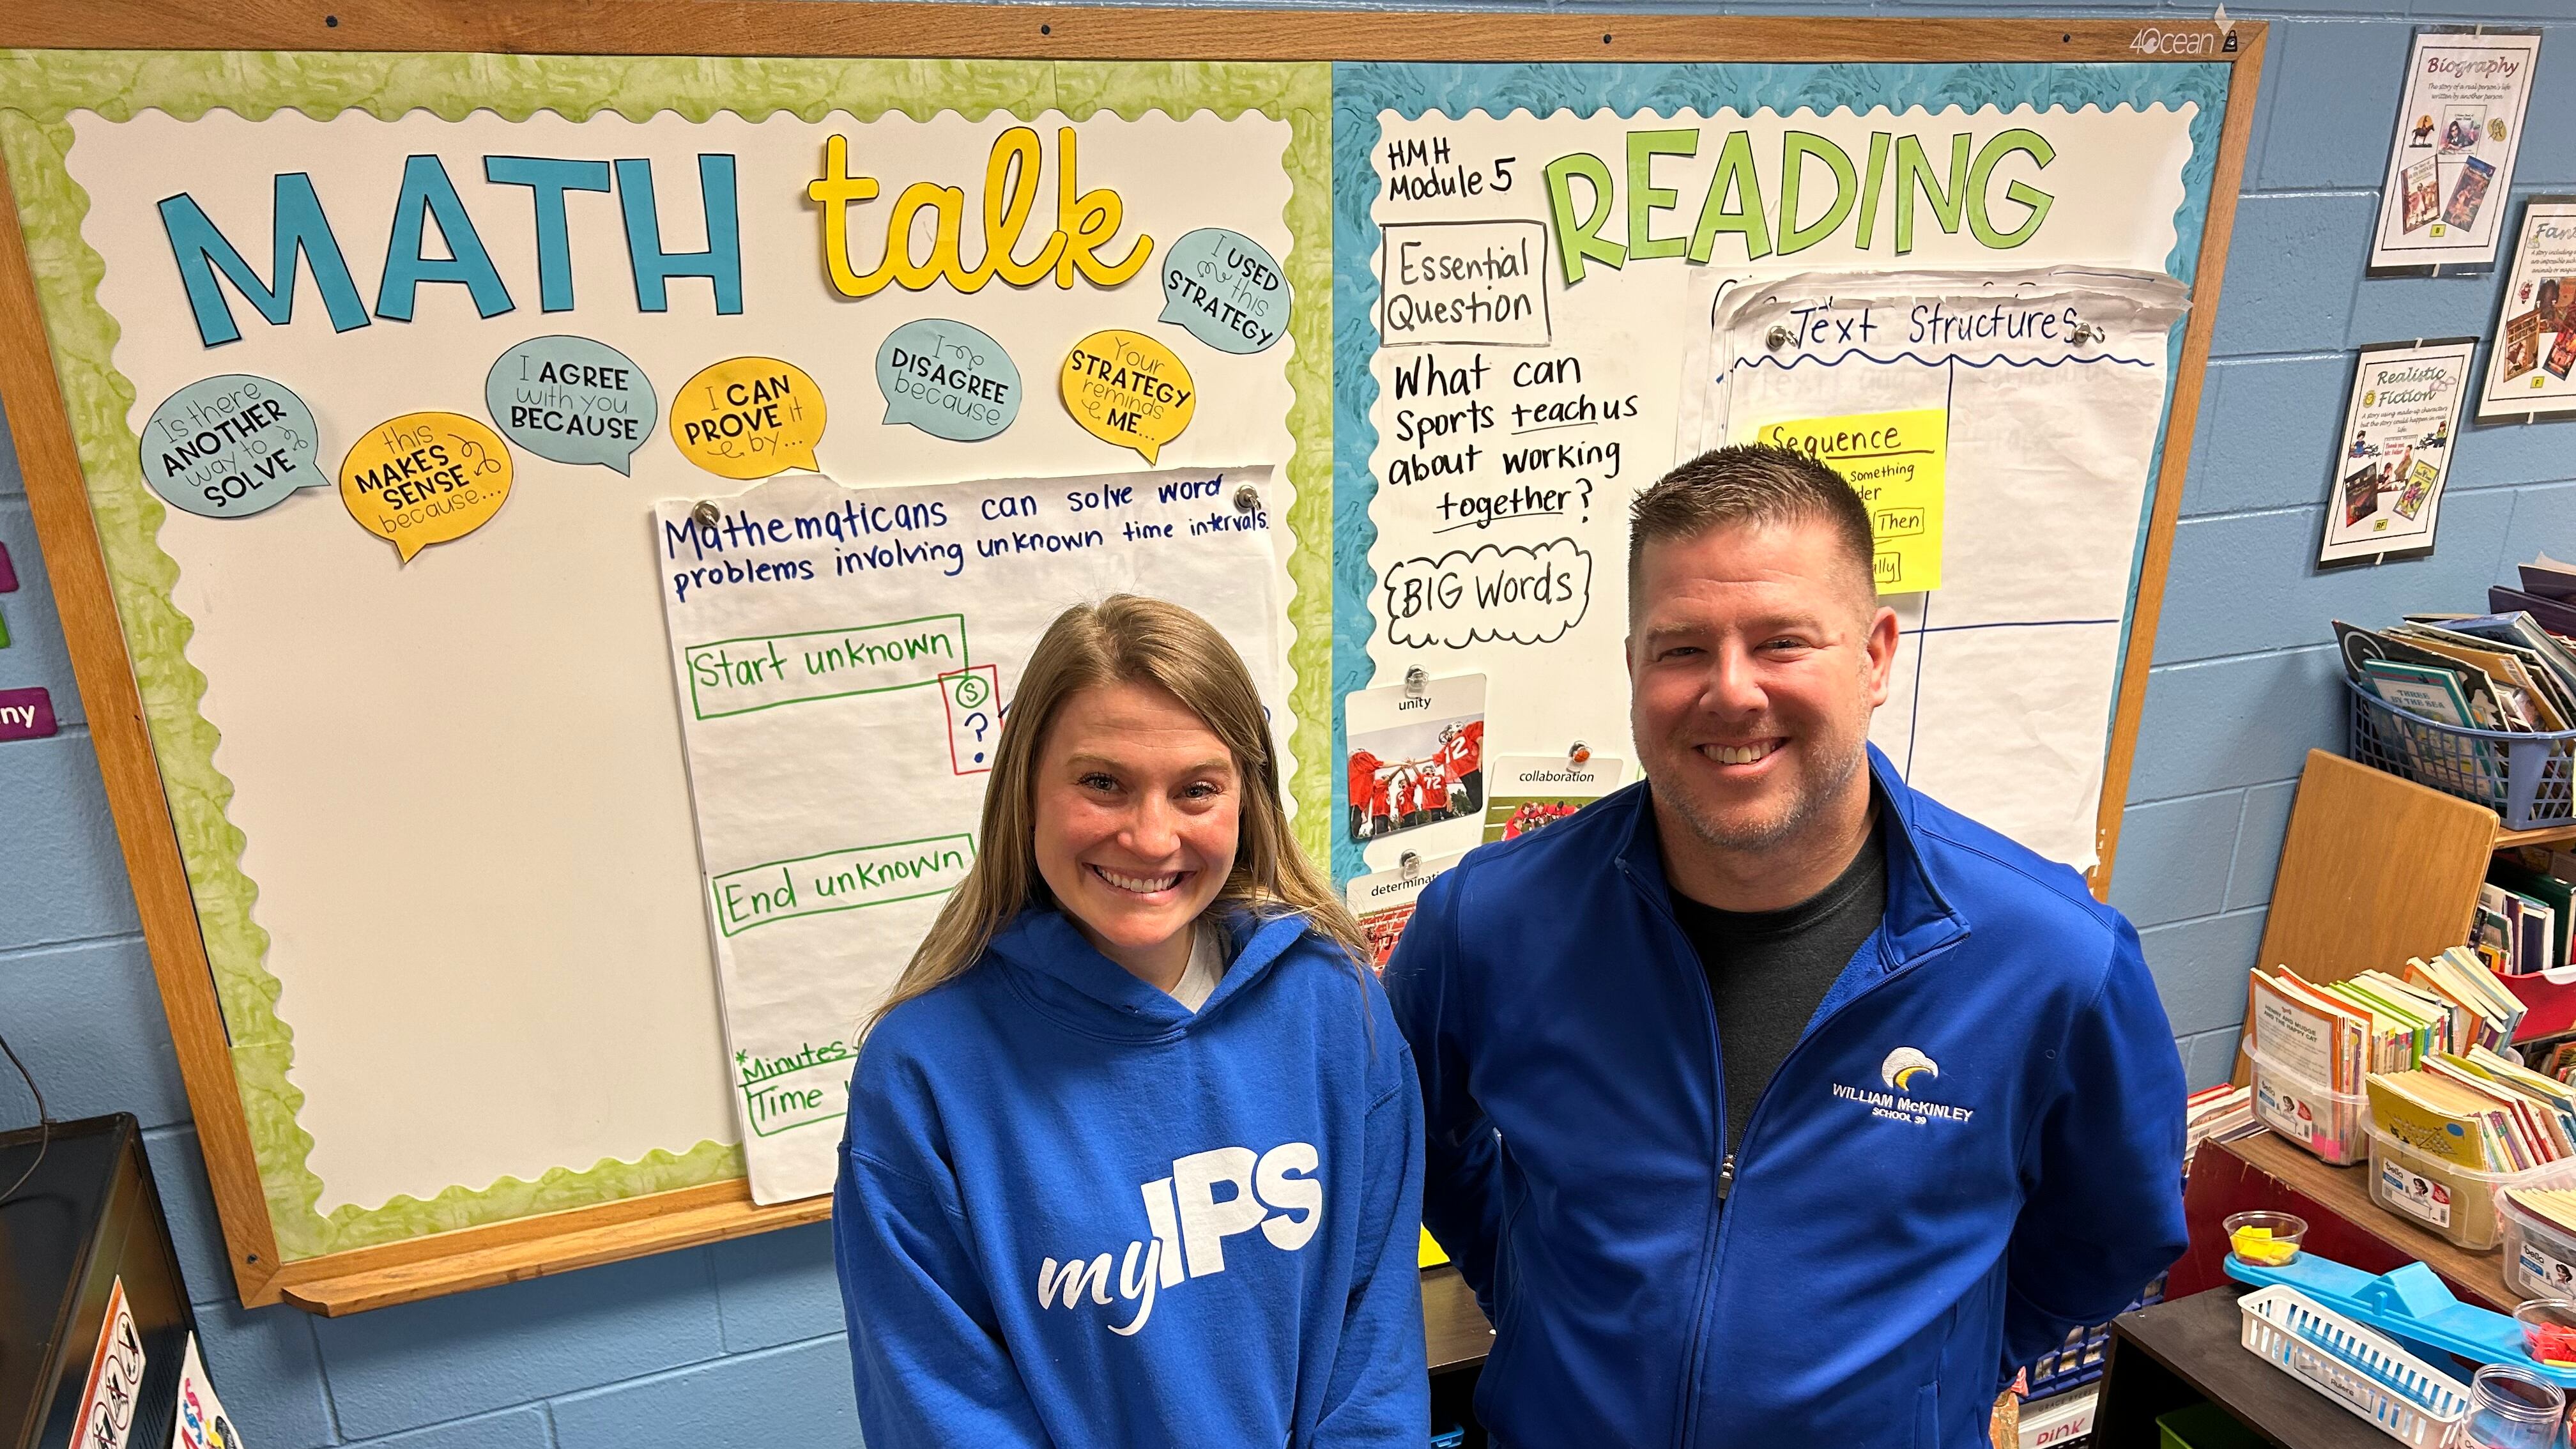 A blonde woman and a man stand smiling in blue shirts in front of two classroom boards, one which says “math” and one which says “reading.”